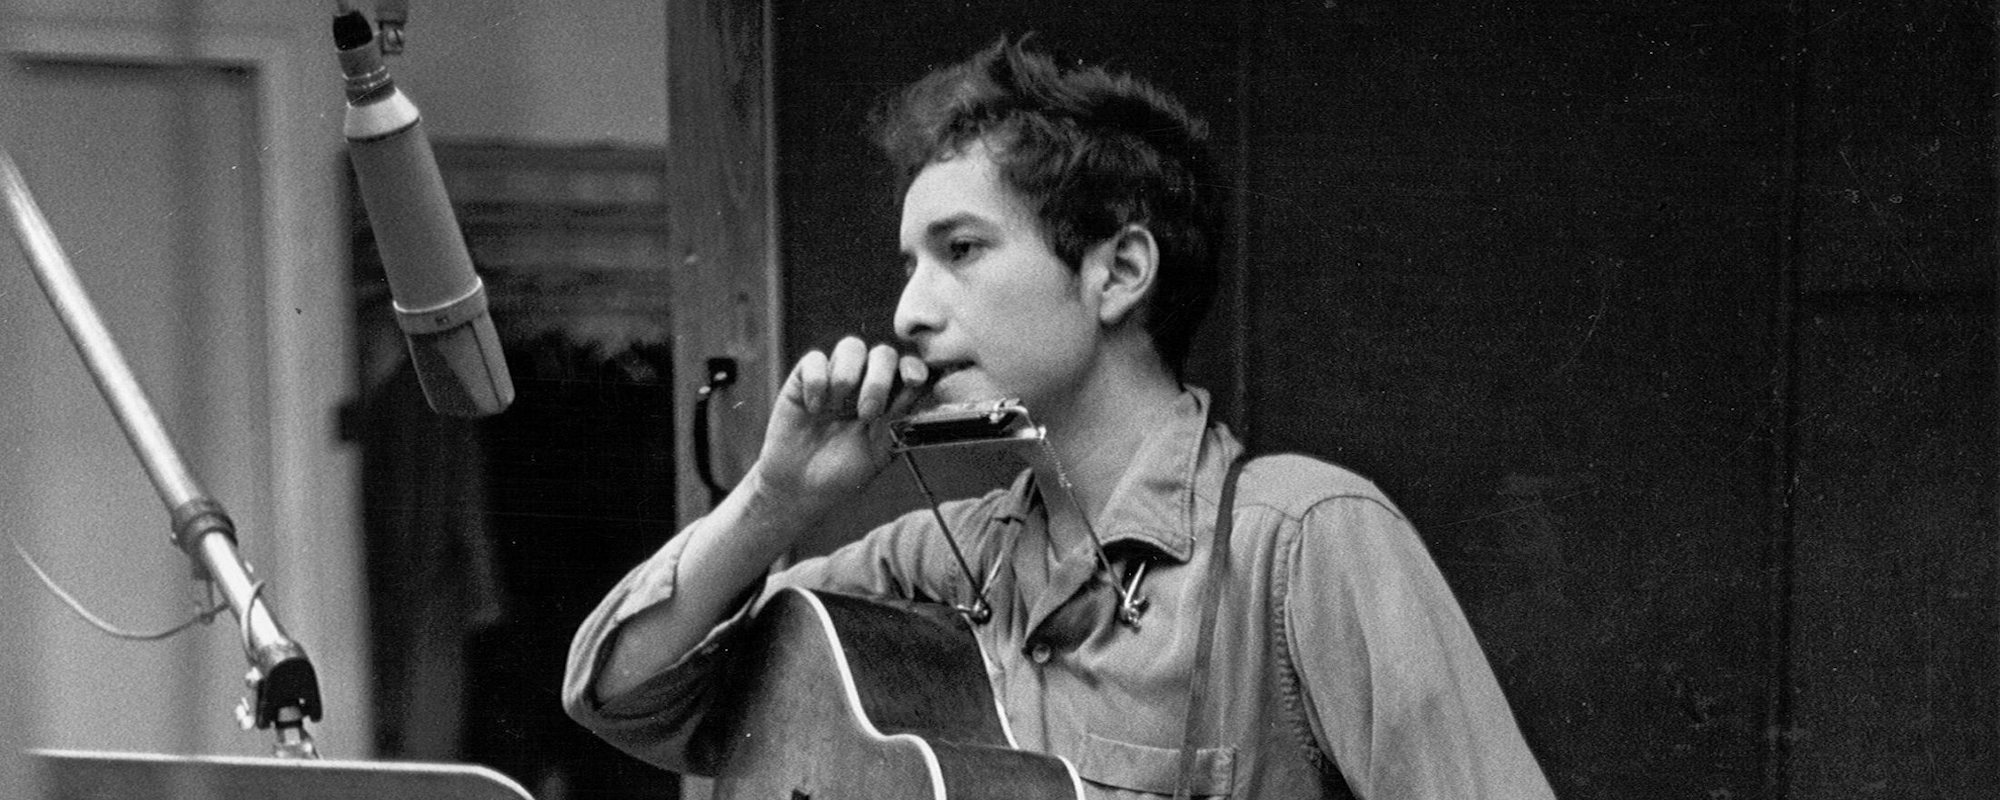 On This Day: Bob Dylan’s Releases His First Single “Mixed-Up Confusion”